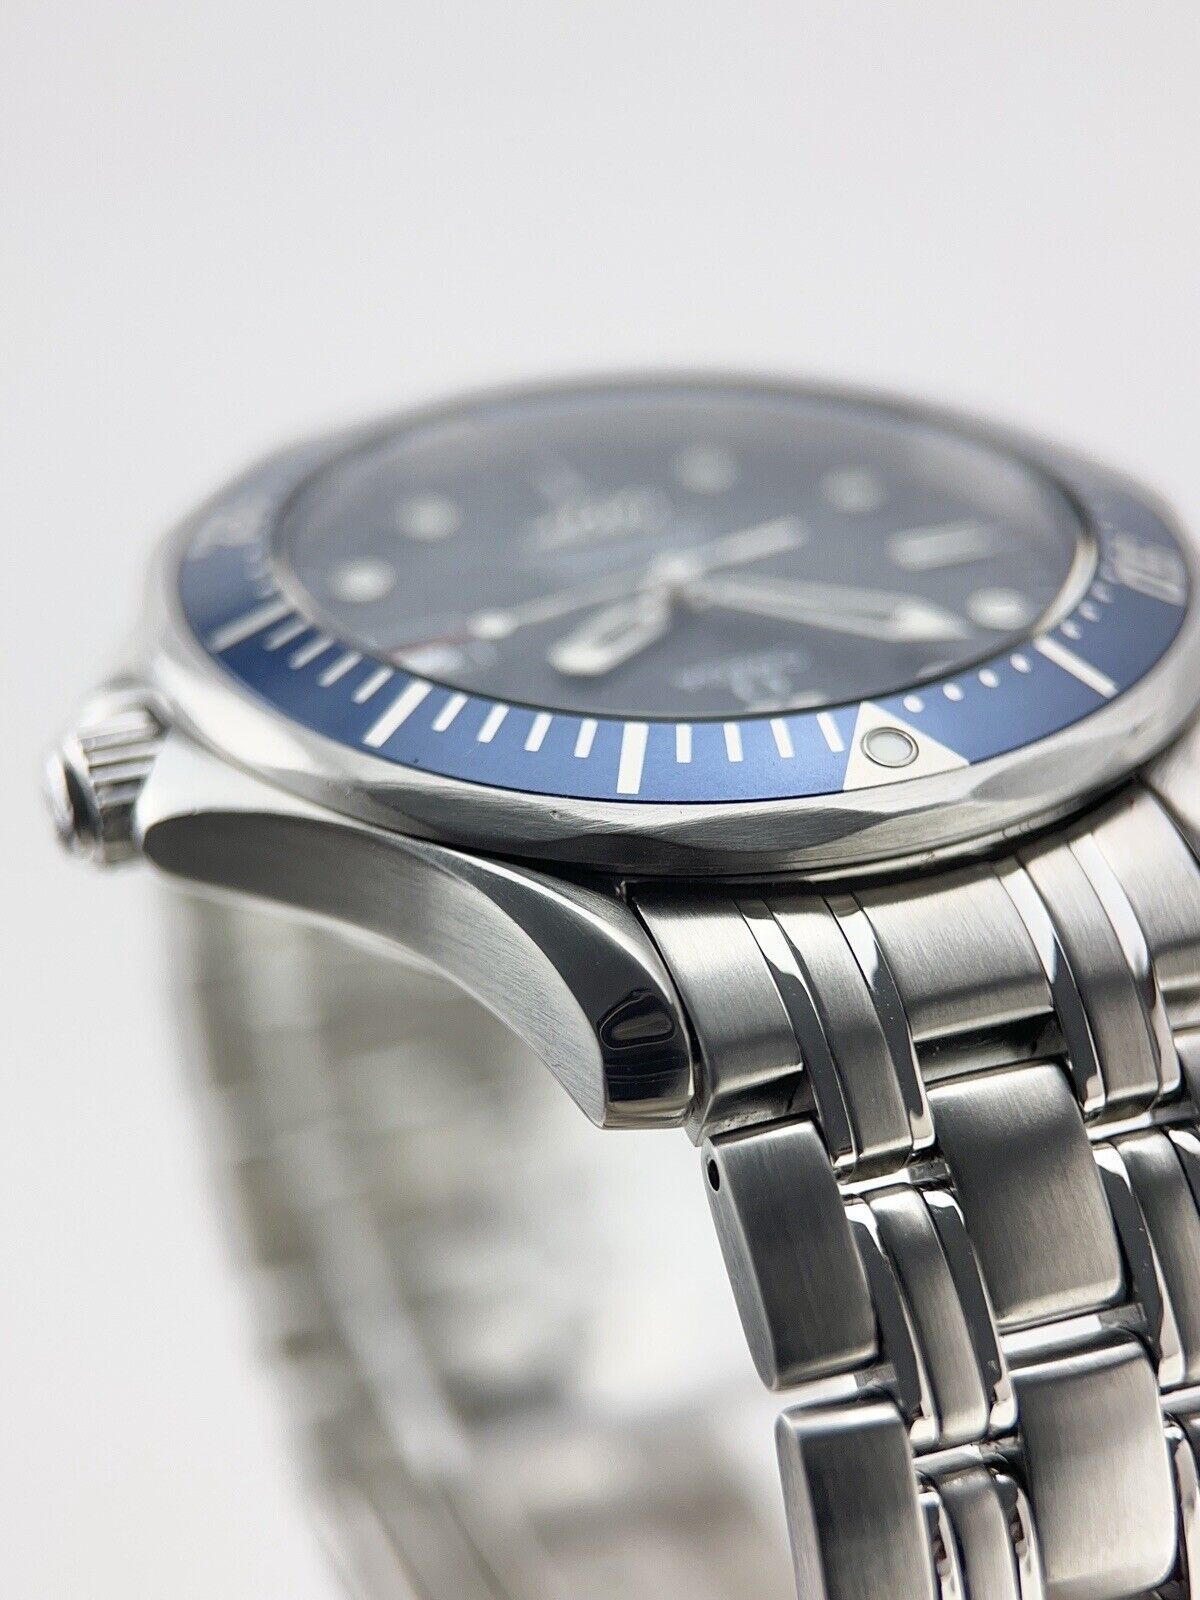 Omega Seamaster Diver 300m Steel Blue 41mm Automatic Men’s Watch 2537.80.00